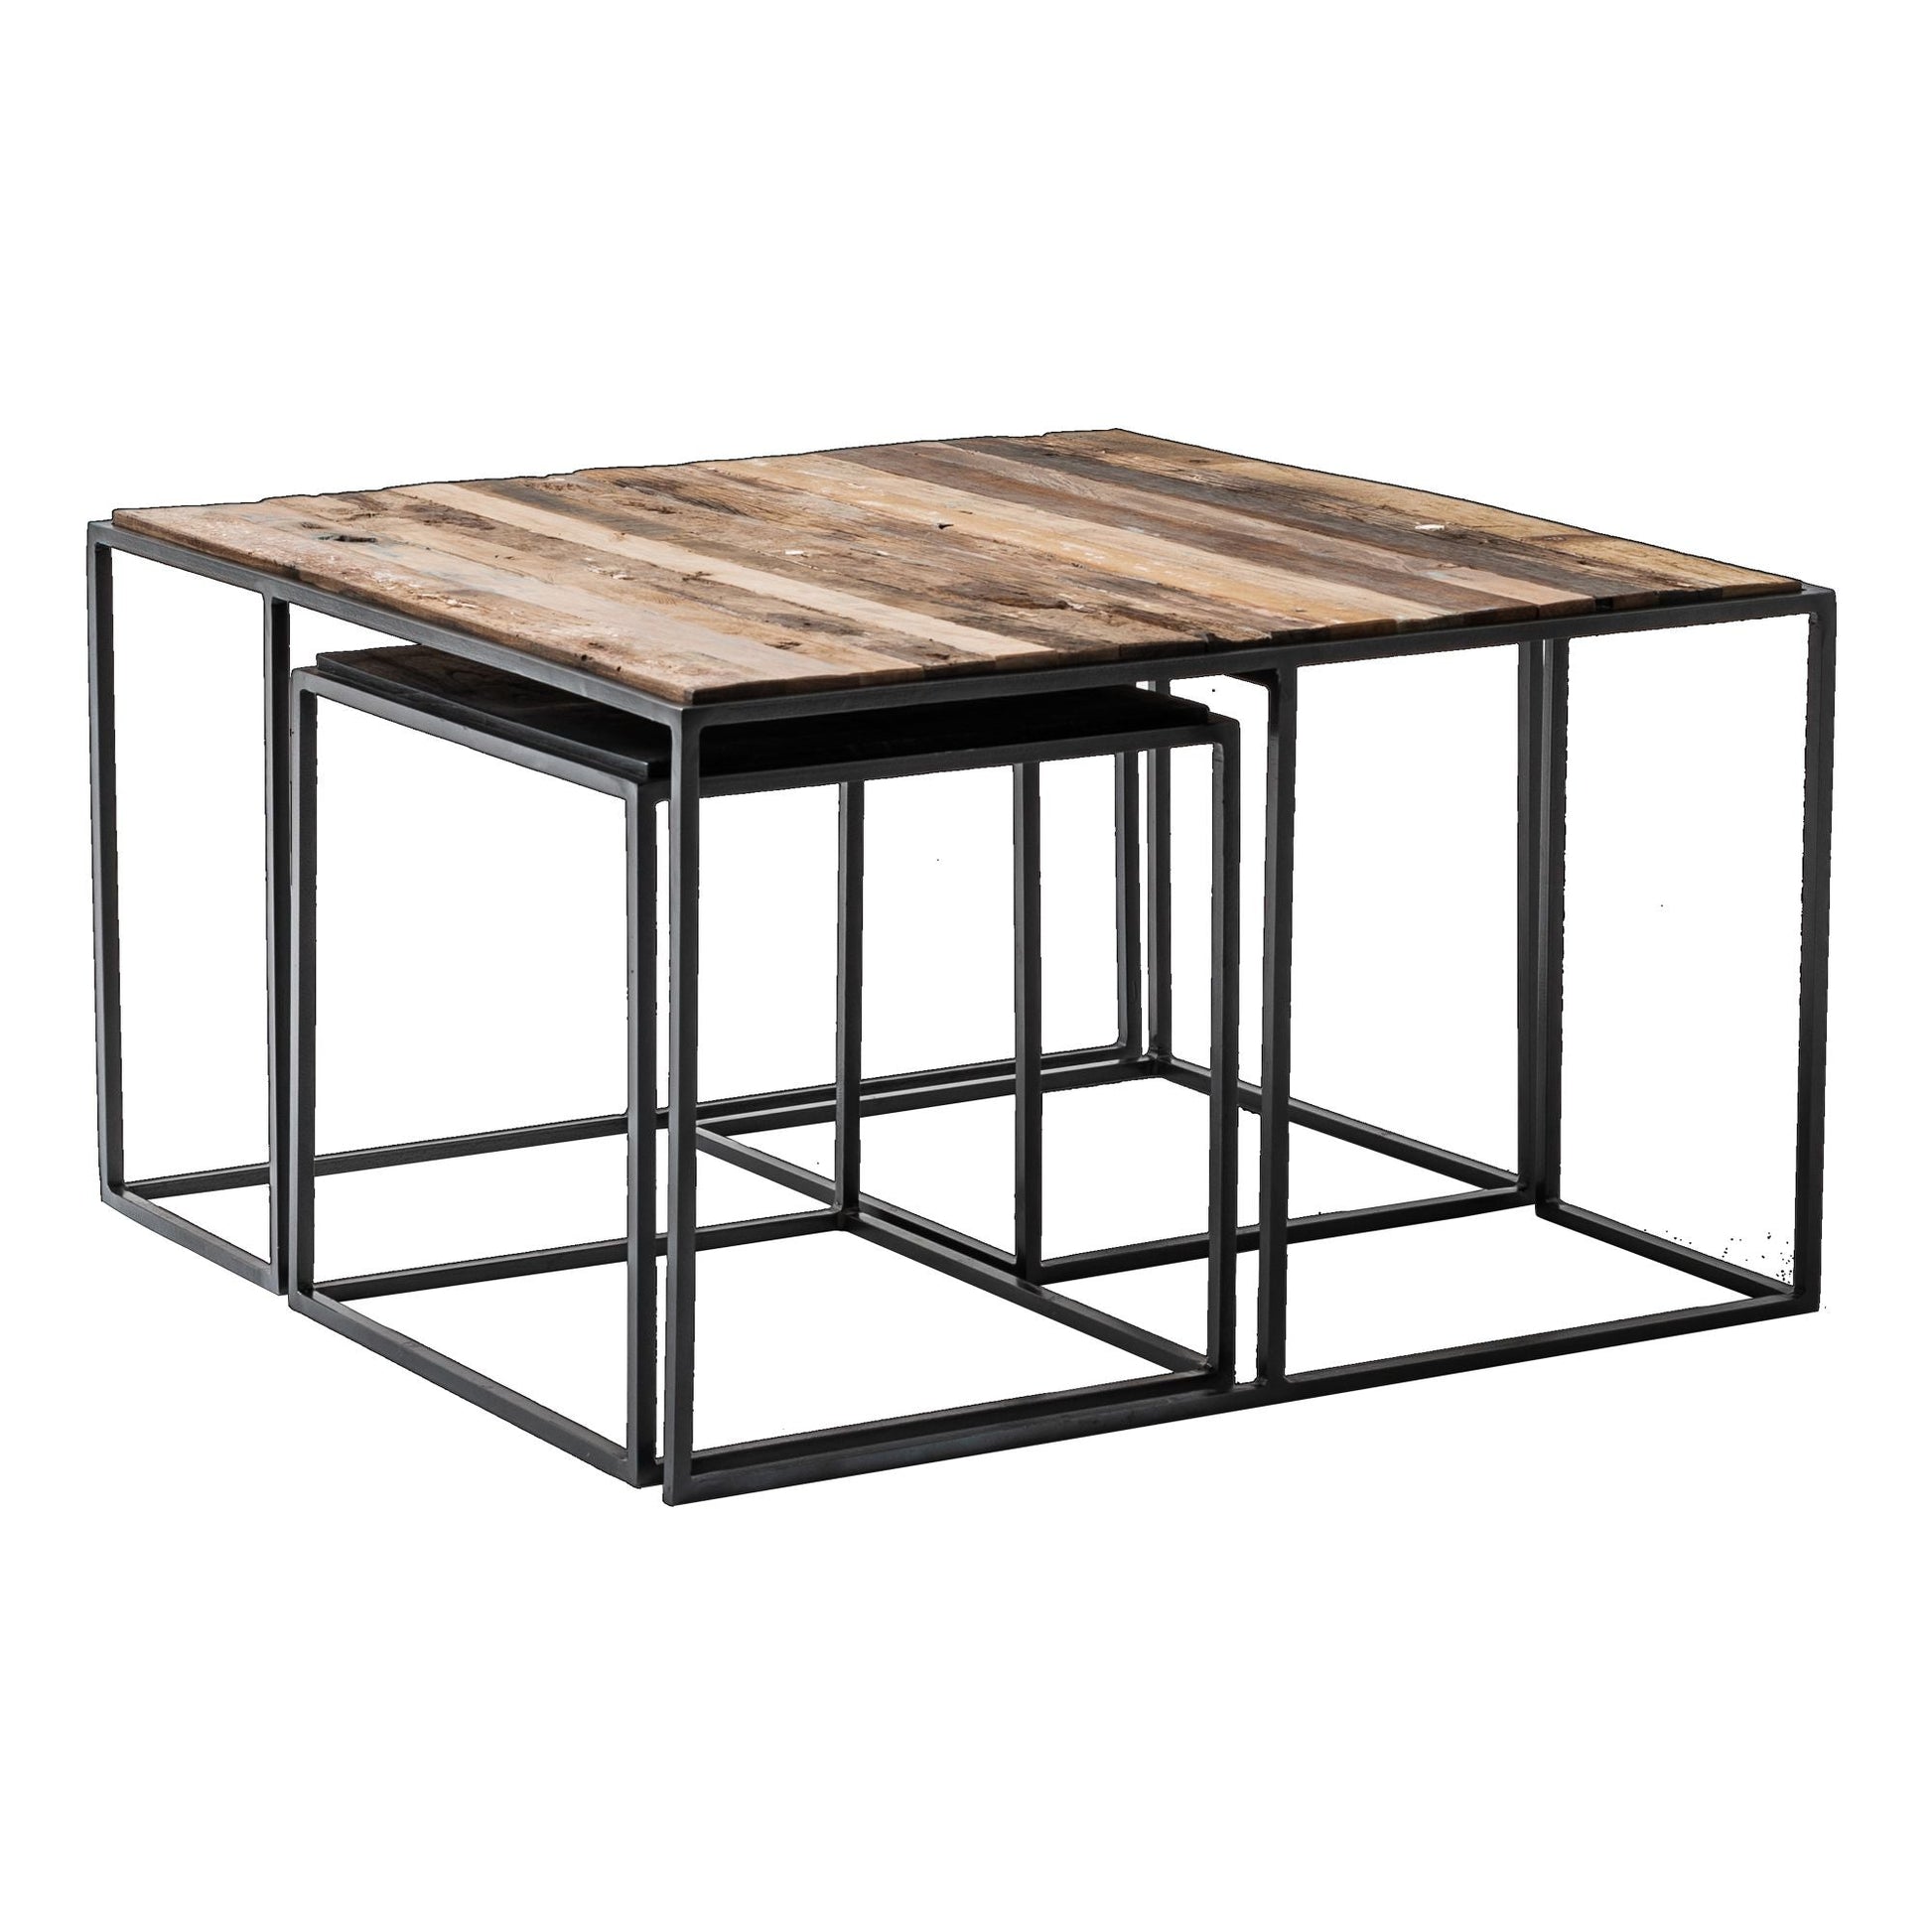 NovaSolo Rustika 32" Black Rustic Boat Wood Coffee Table With 2 Nested Side Tables